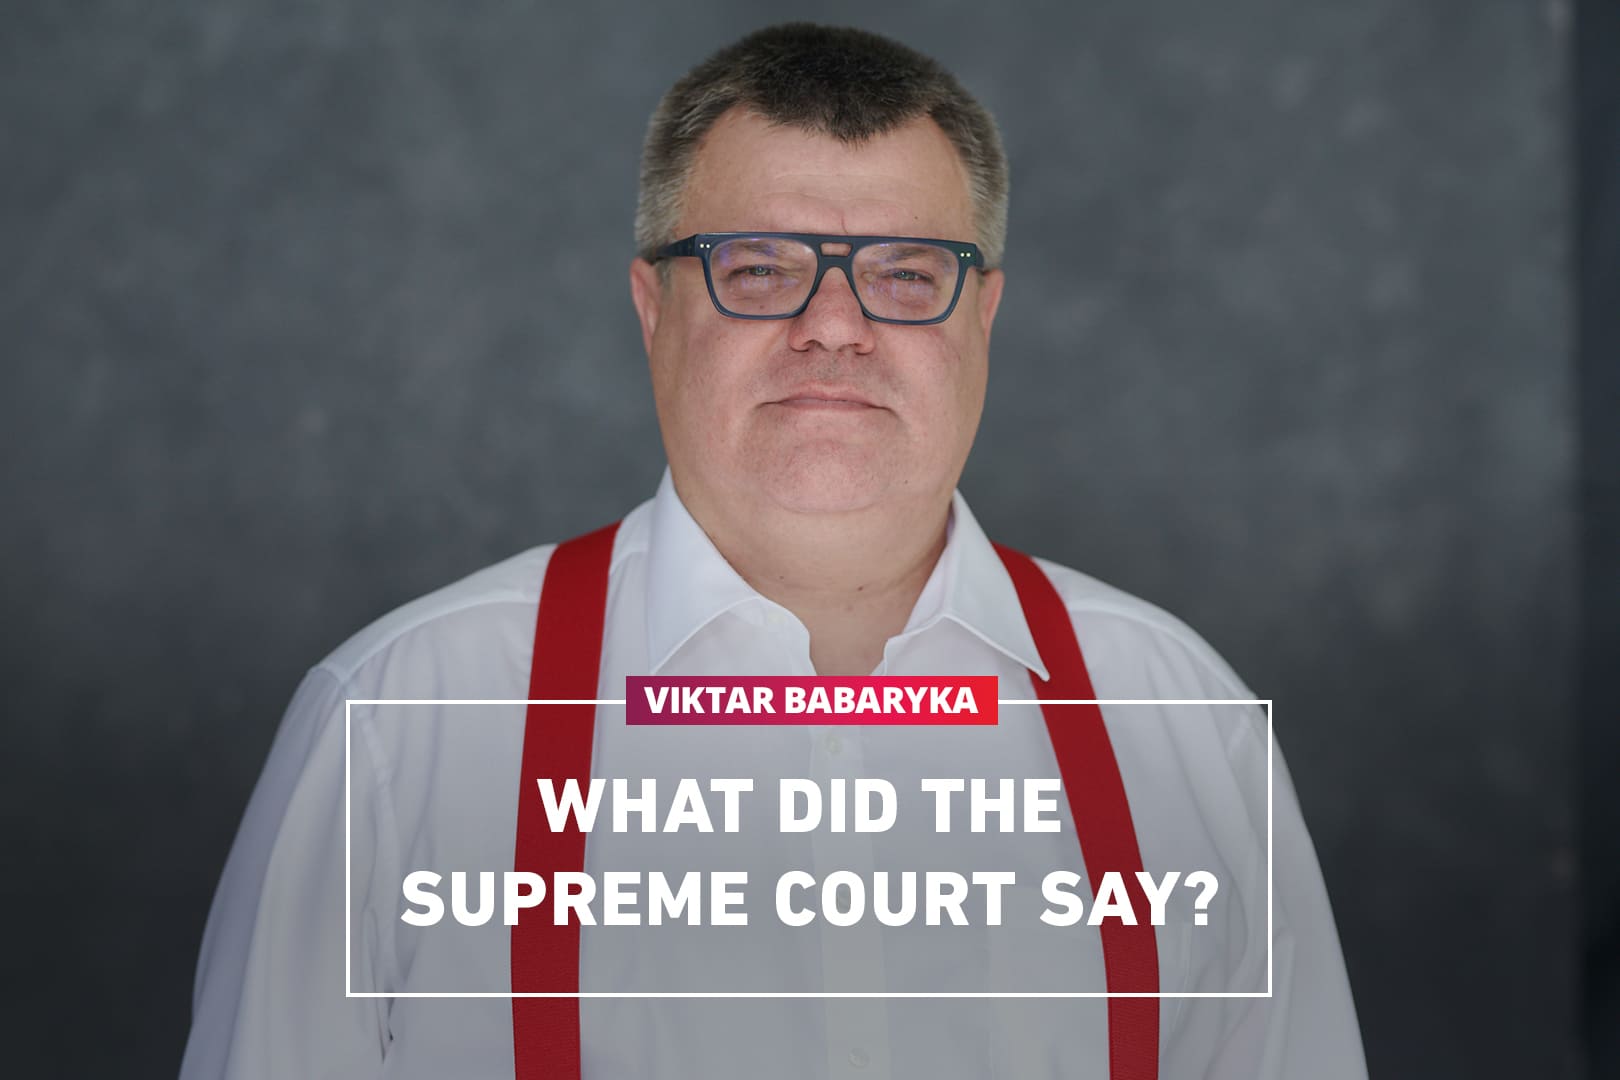 What did the Supreme Court say